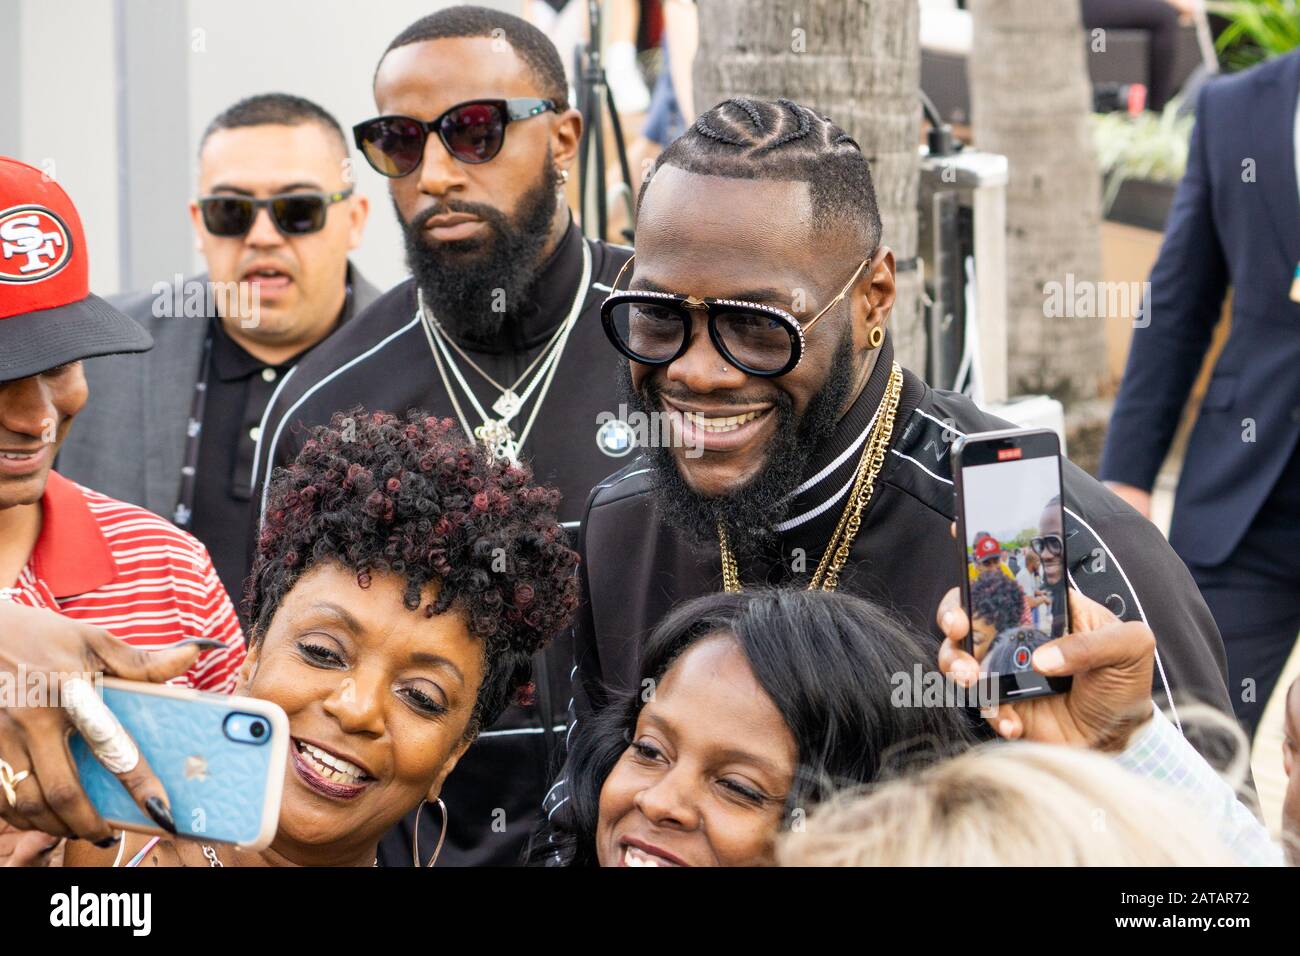 Miami Beach, Floride, États-Unis. 31 janvier 2020. WBC Heavy Weight Bowing Champion Deontay Wilder au Super Bowl LIV Experience à Miami Beach, FL 31 janvier 2020. Crédit: Mpi140/Media Punch/Alay Live News Banque D'Images